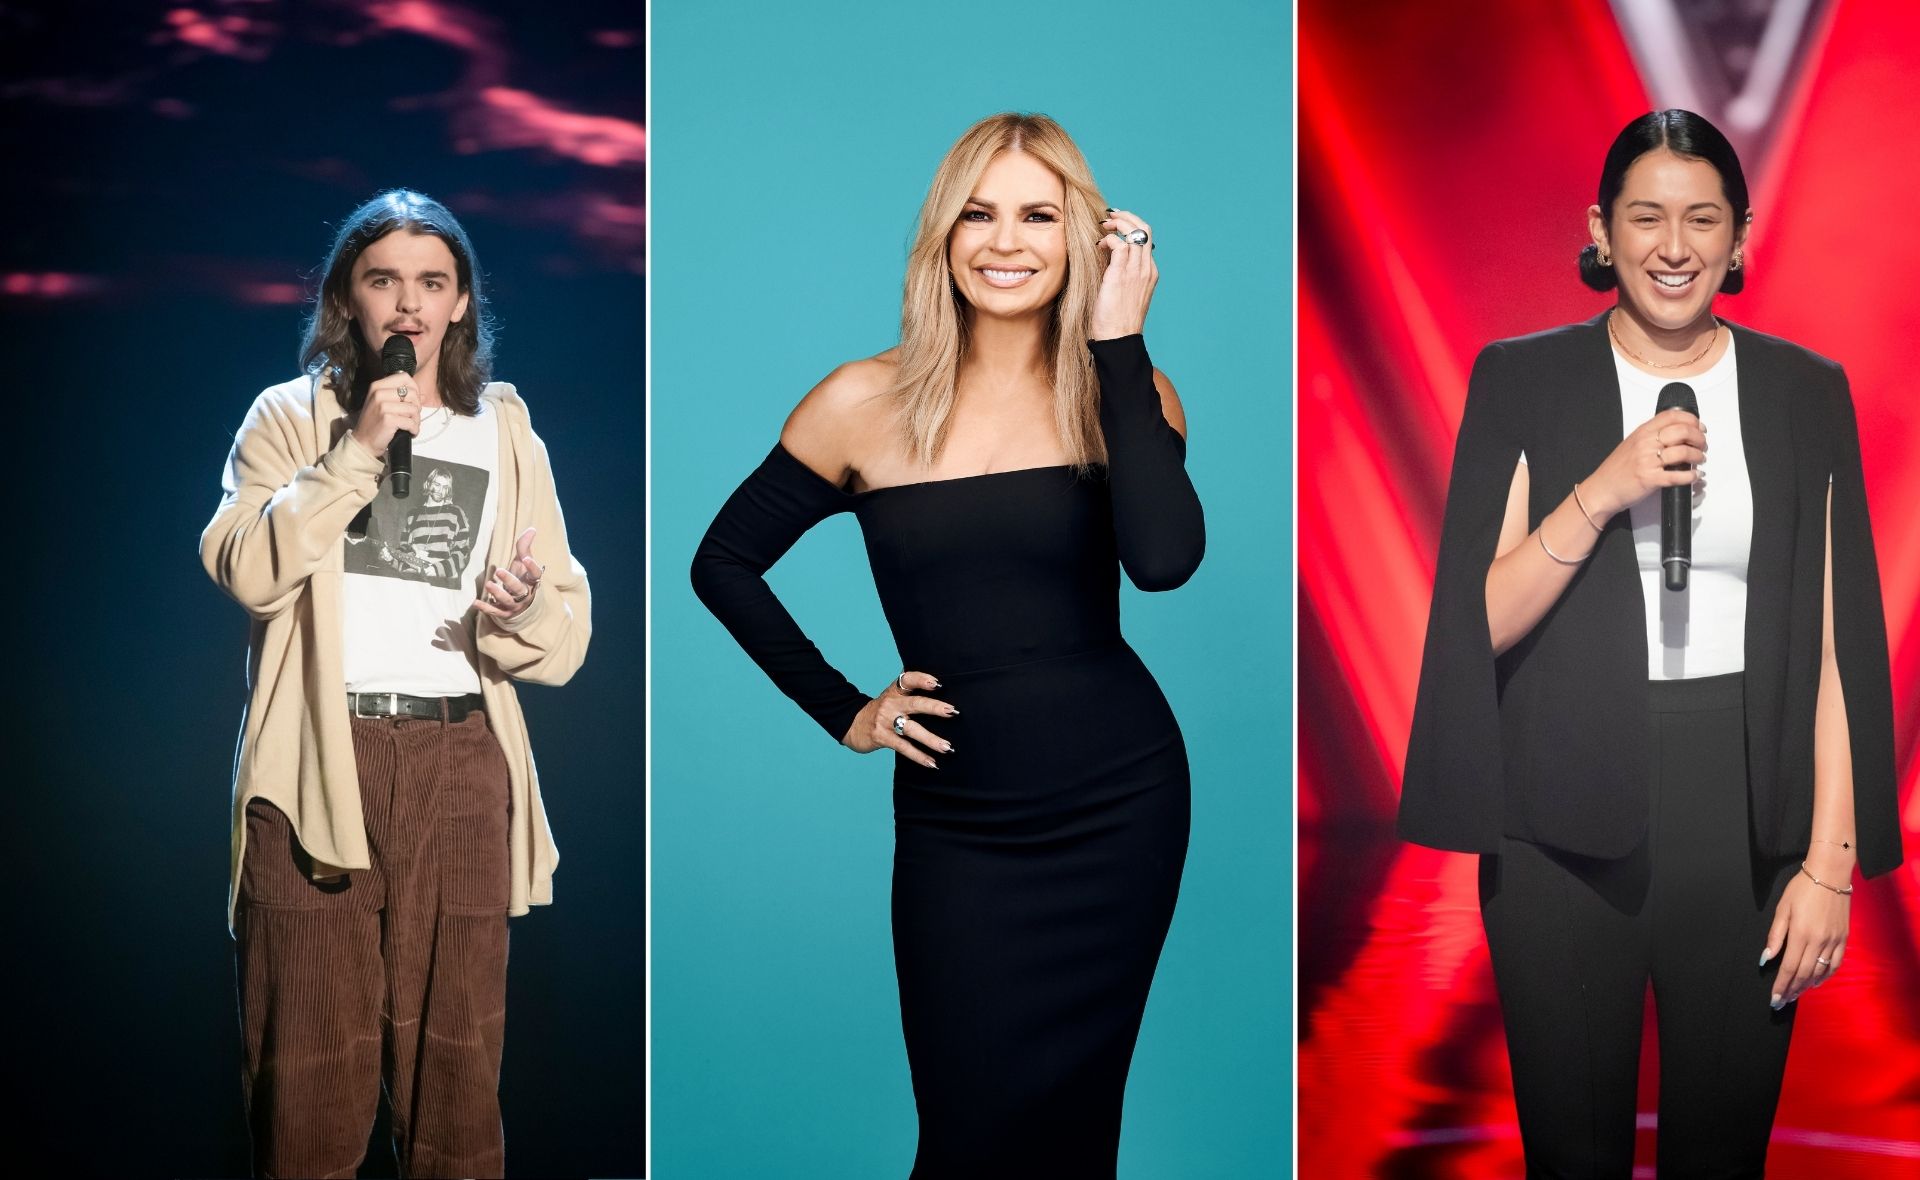 EXCLUSIVE: Sonia Kruger reveals her top five contestants on The Voice and how the show ‘found its heart again’